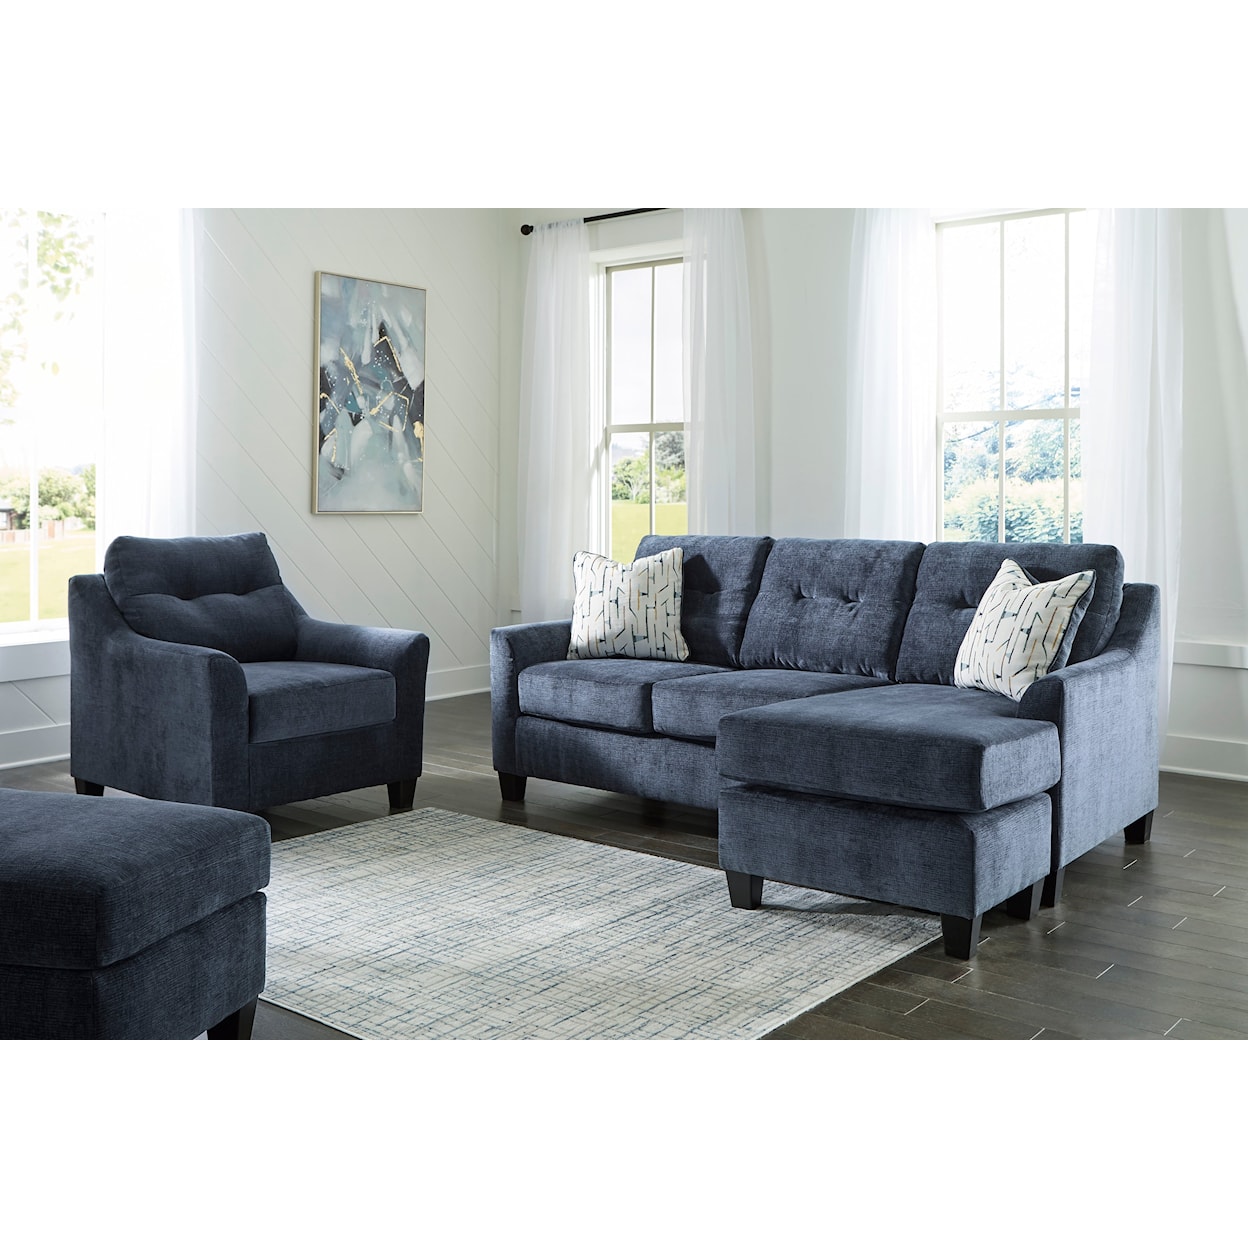 Ashley Furniture Benchcraft Amity Bay Sofa Chaise, Chair, and Ottoman